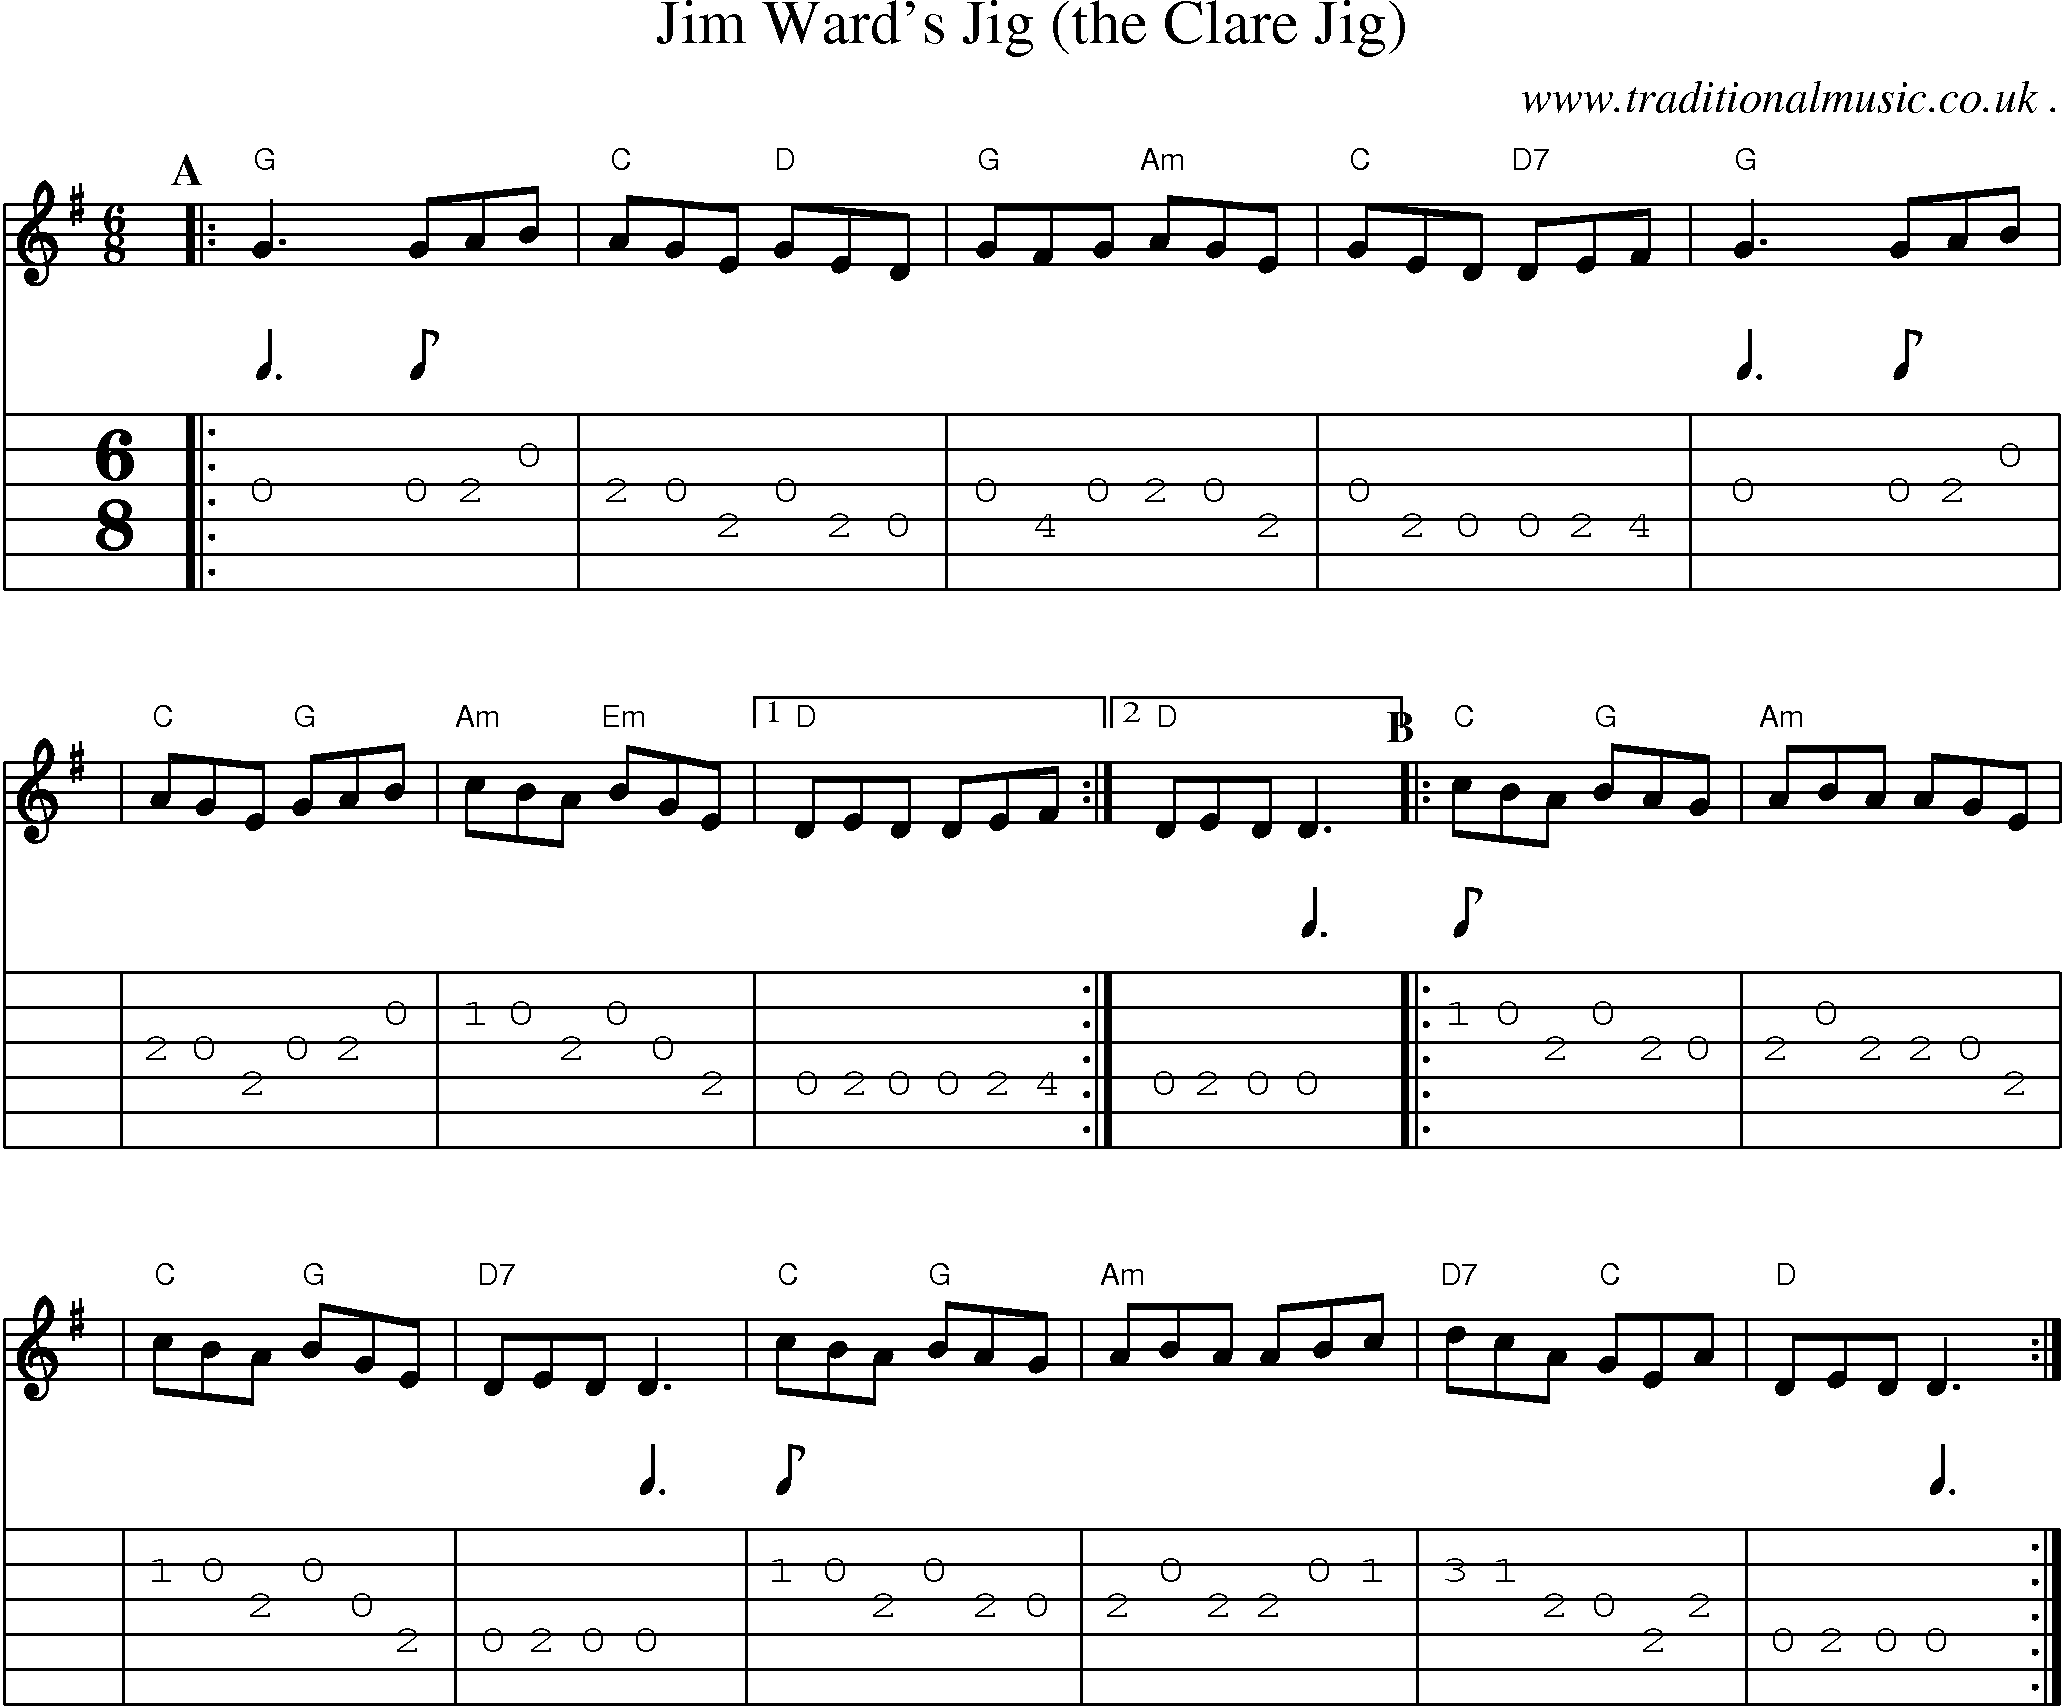 Sheet-music  score, Chords and Guitar Tabs for Jim Wards Jig The Clare Jig